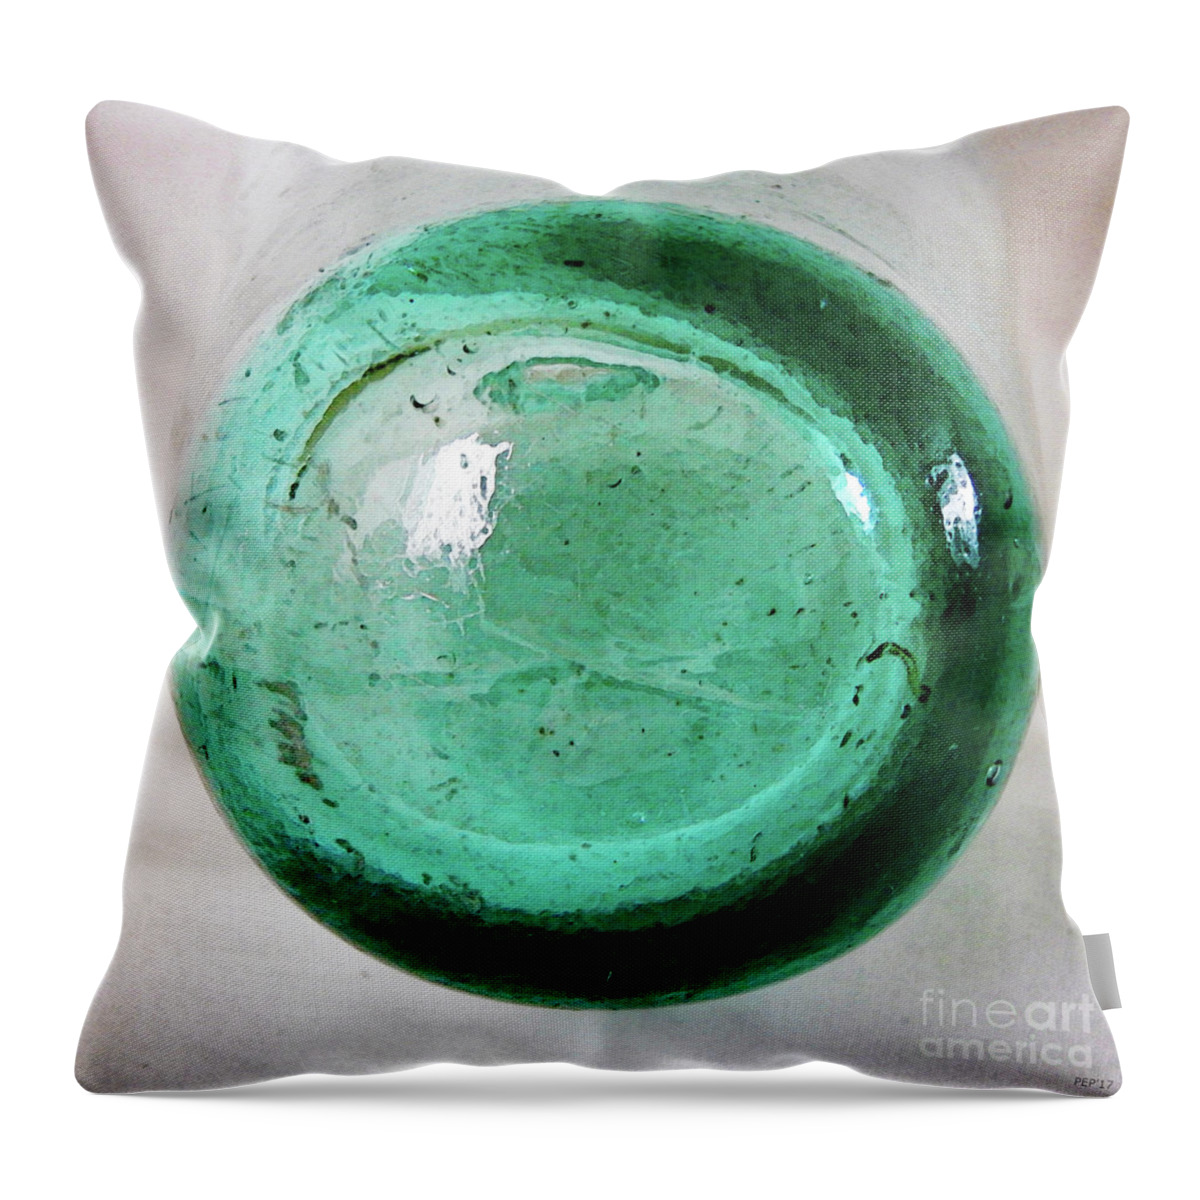 Old Bottles Throw Pillow featuring the glass art Vintage Glass Bottle Four by Phil Perkins